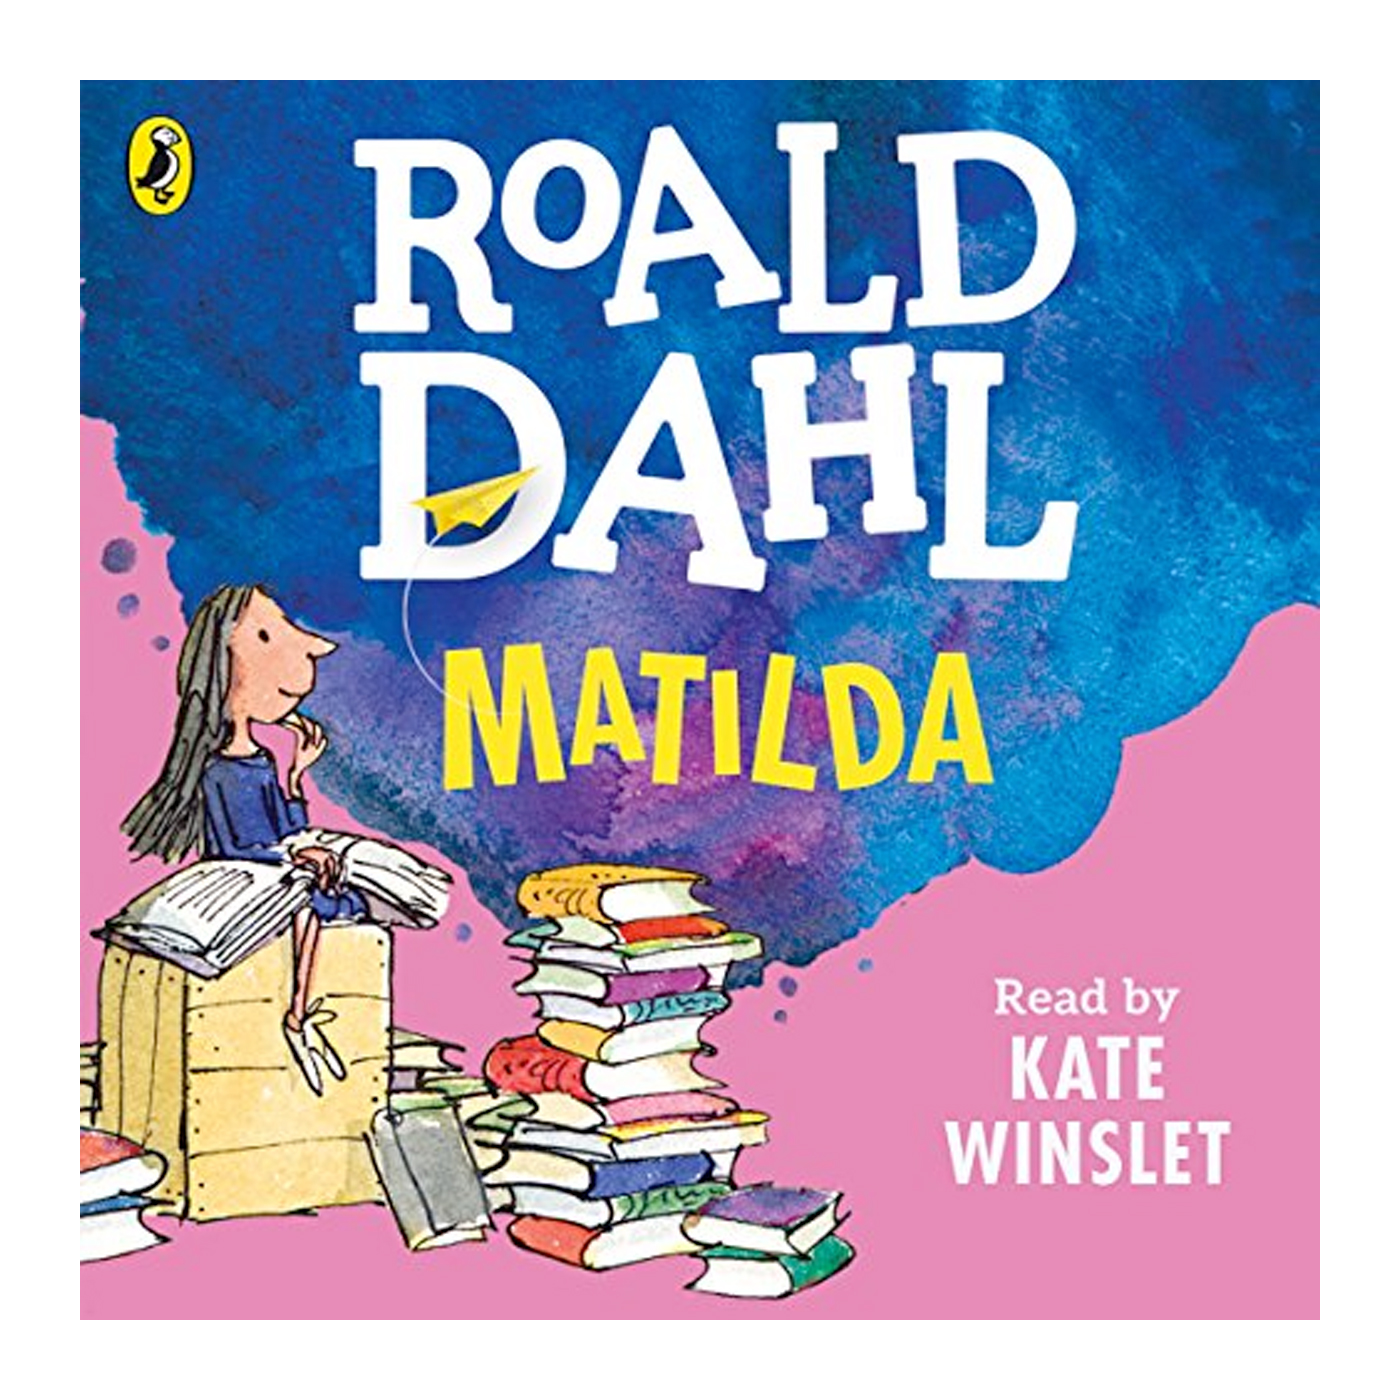 PUFFIN Matilda: Narrated By Kate Winslet